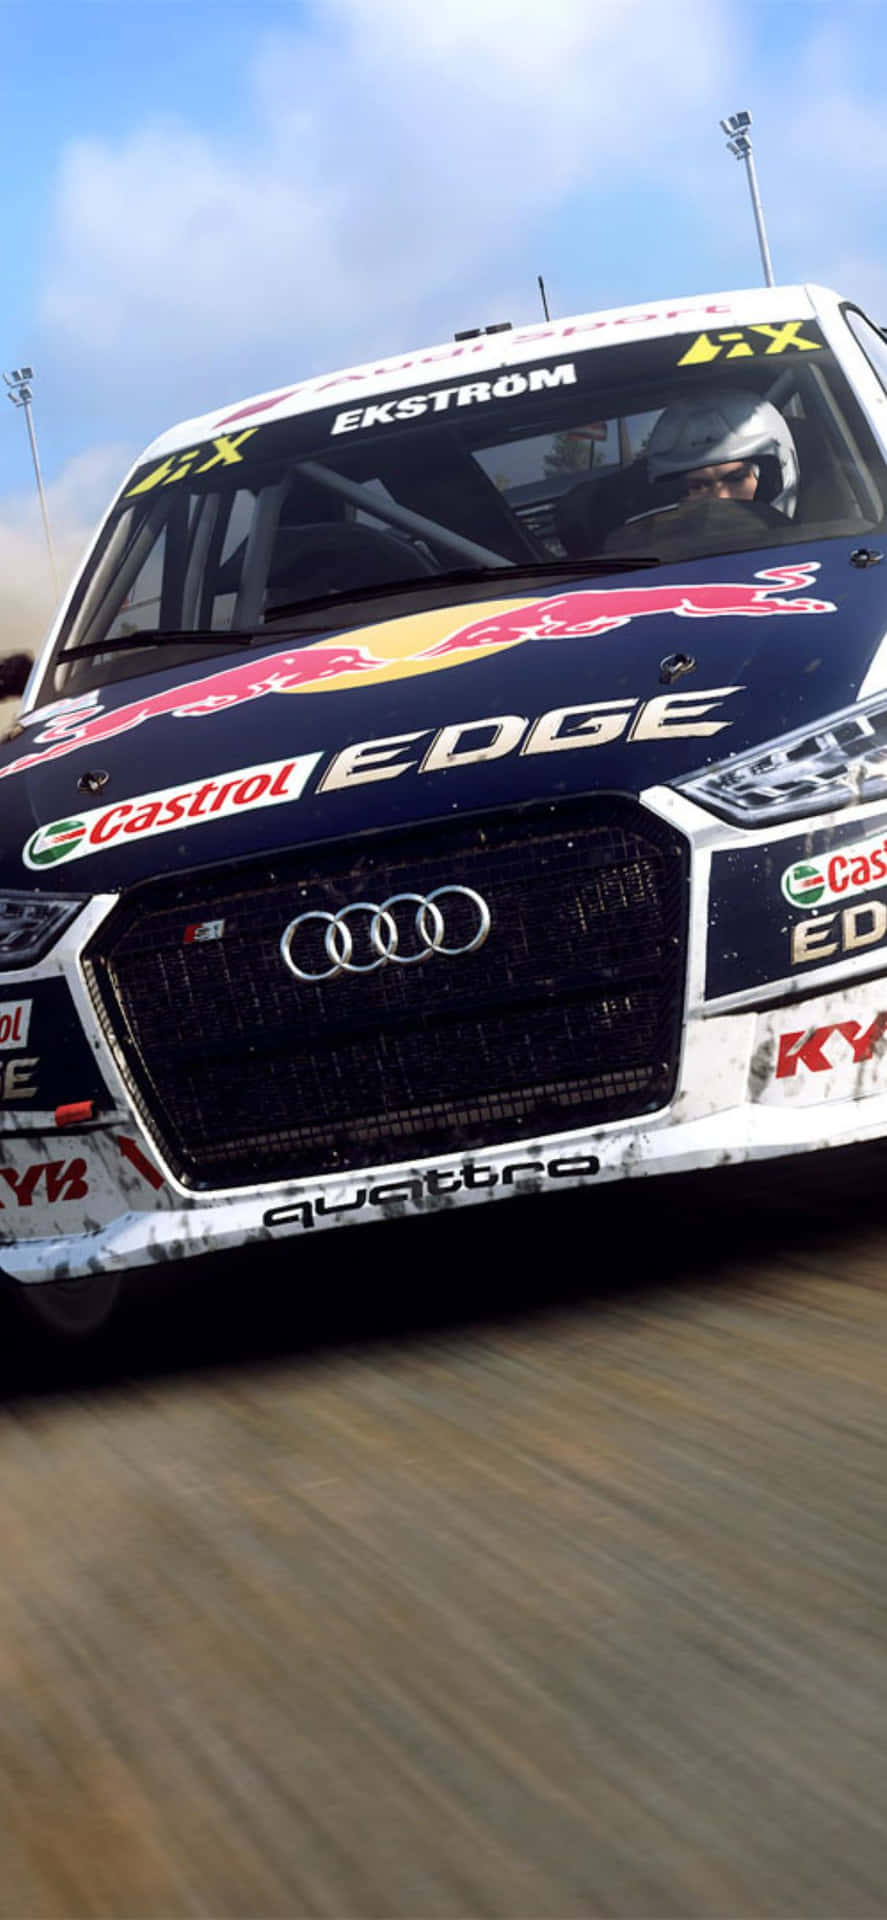 Conquer Dirt Rally with the iPhone X